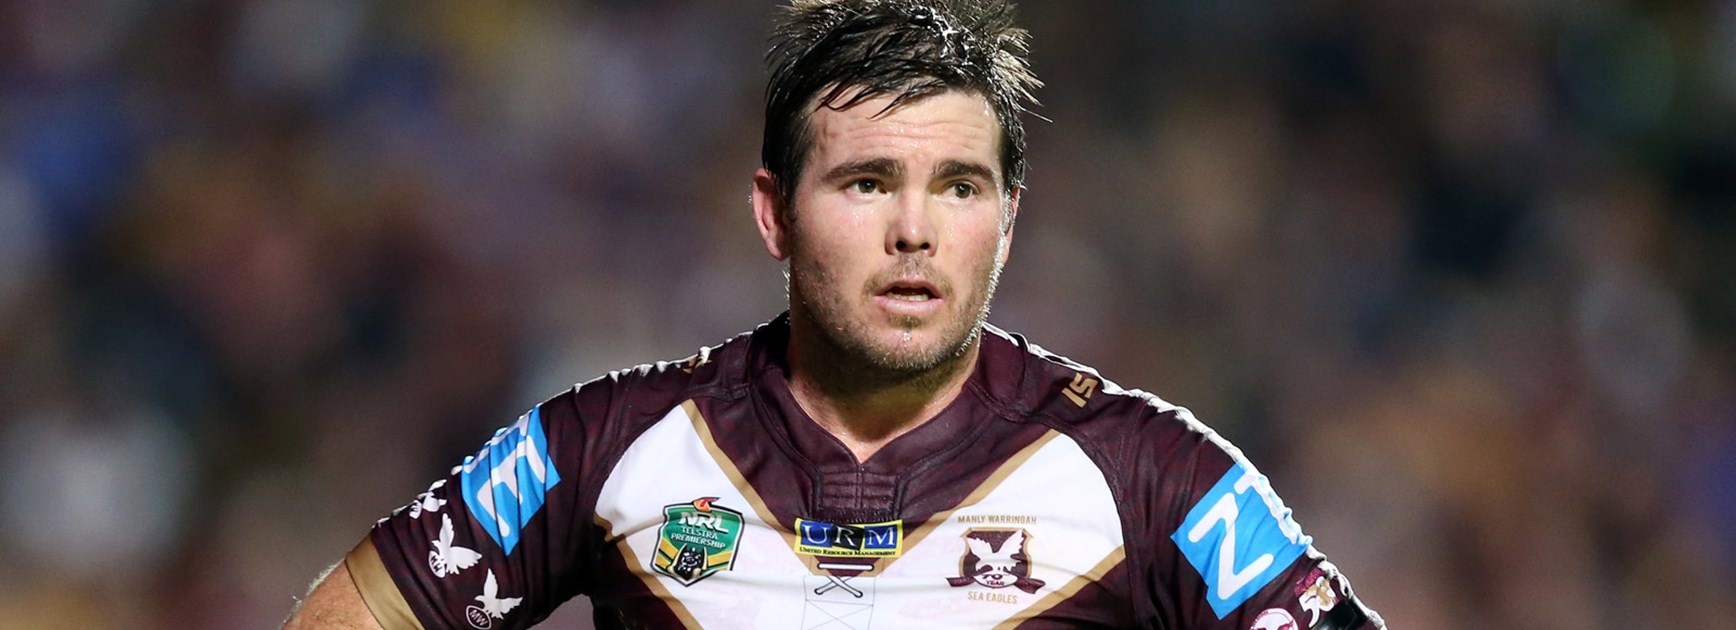 Sea Eagles captain Jamie Lyon has announced his retirement at the end of the 2016 season.